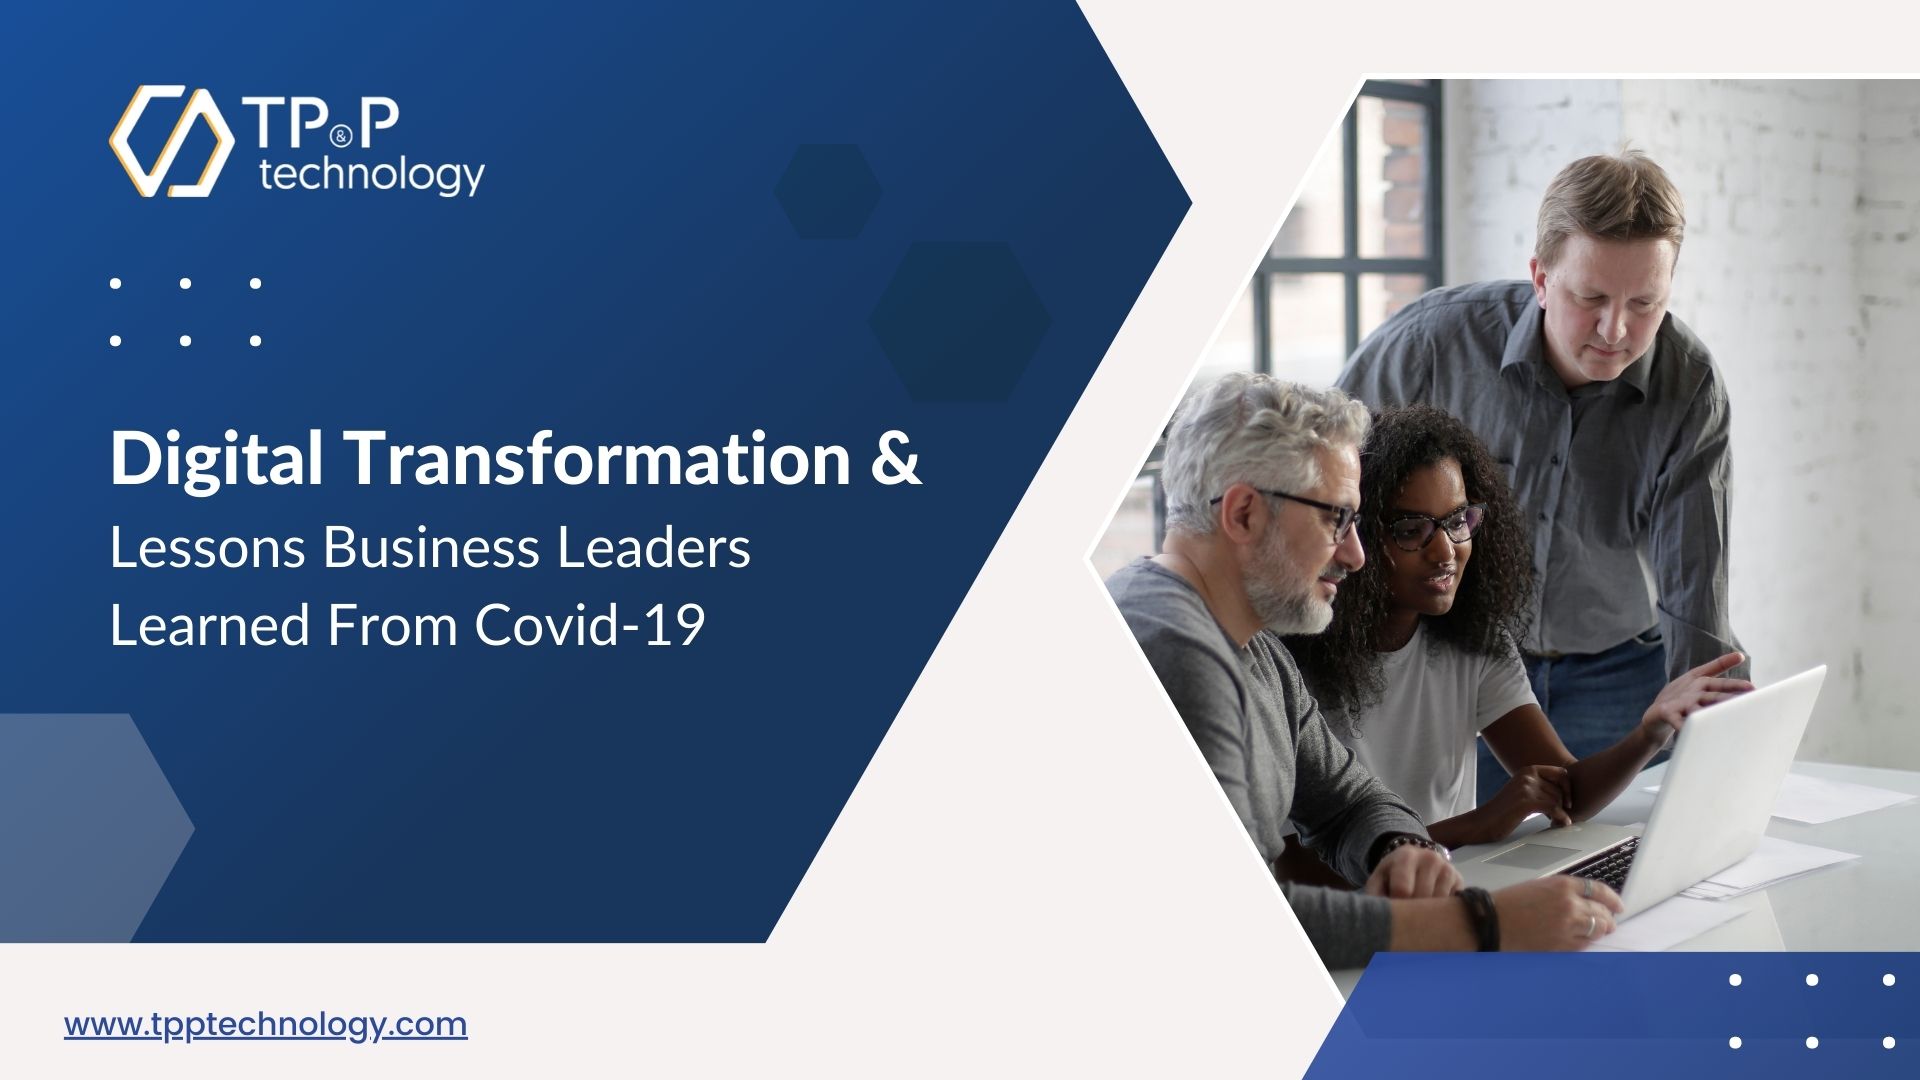 Digital Transformation & Lessons Business Leaders Learned From Covid-19